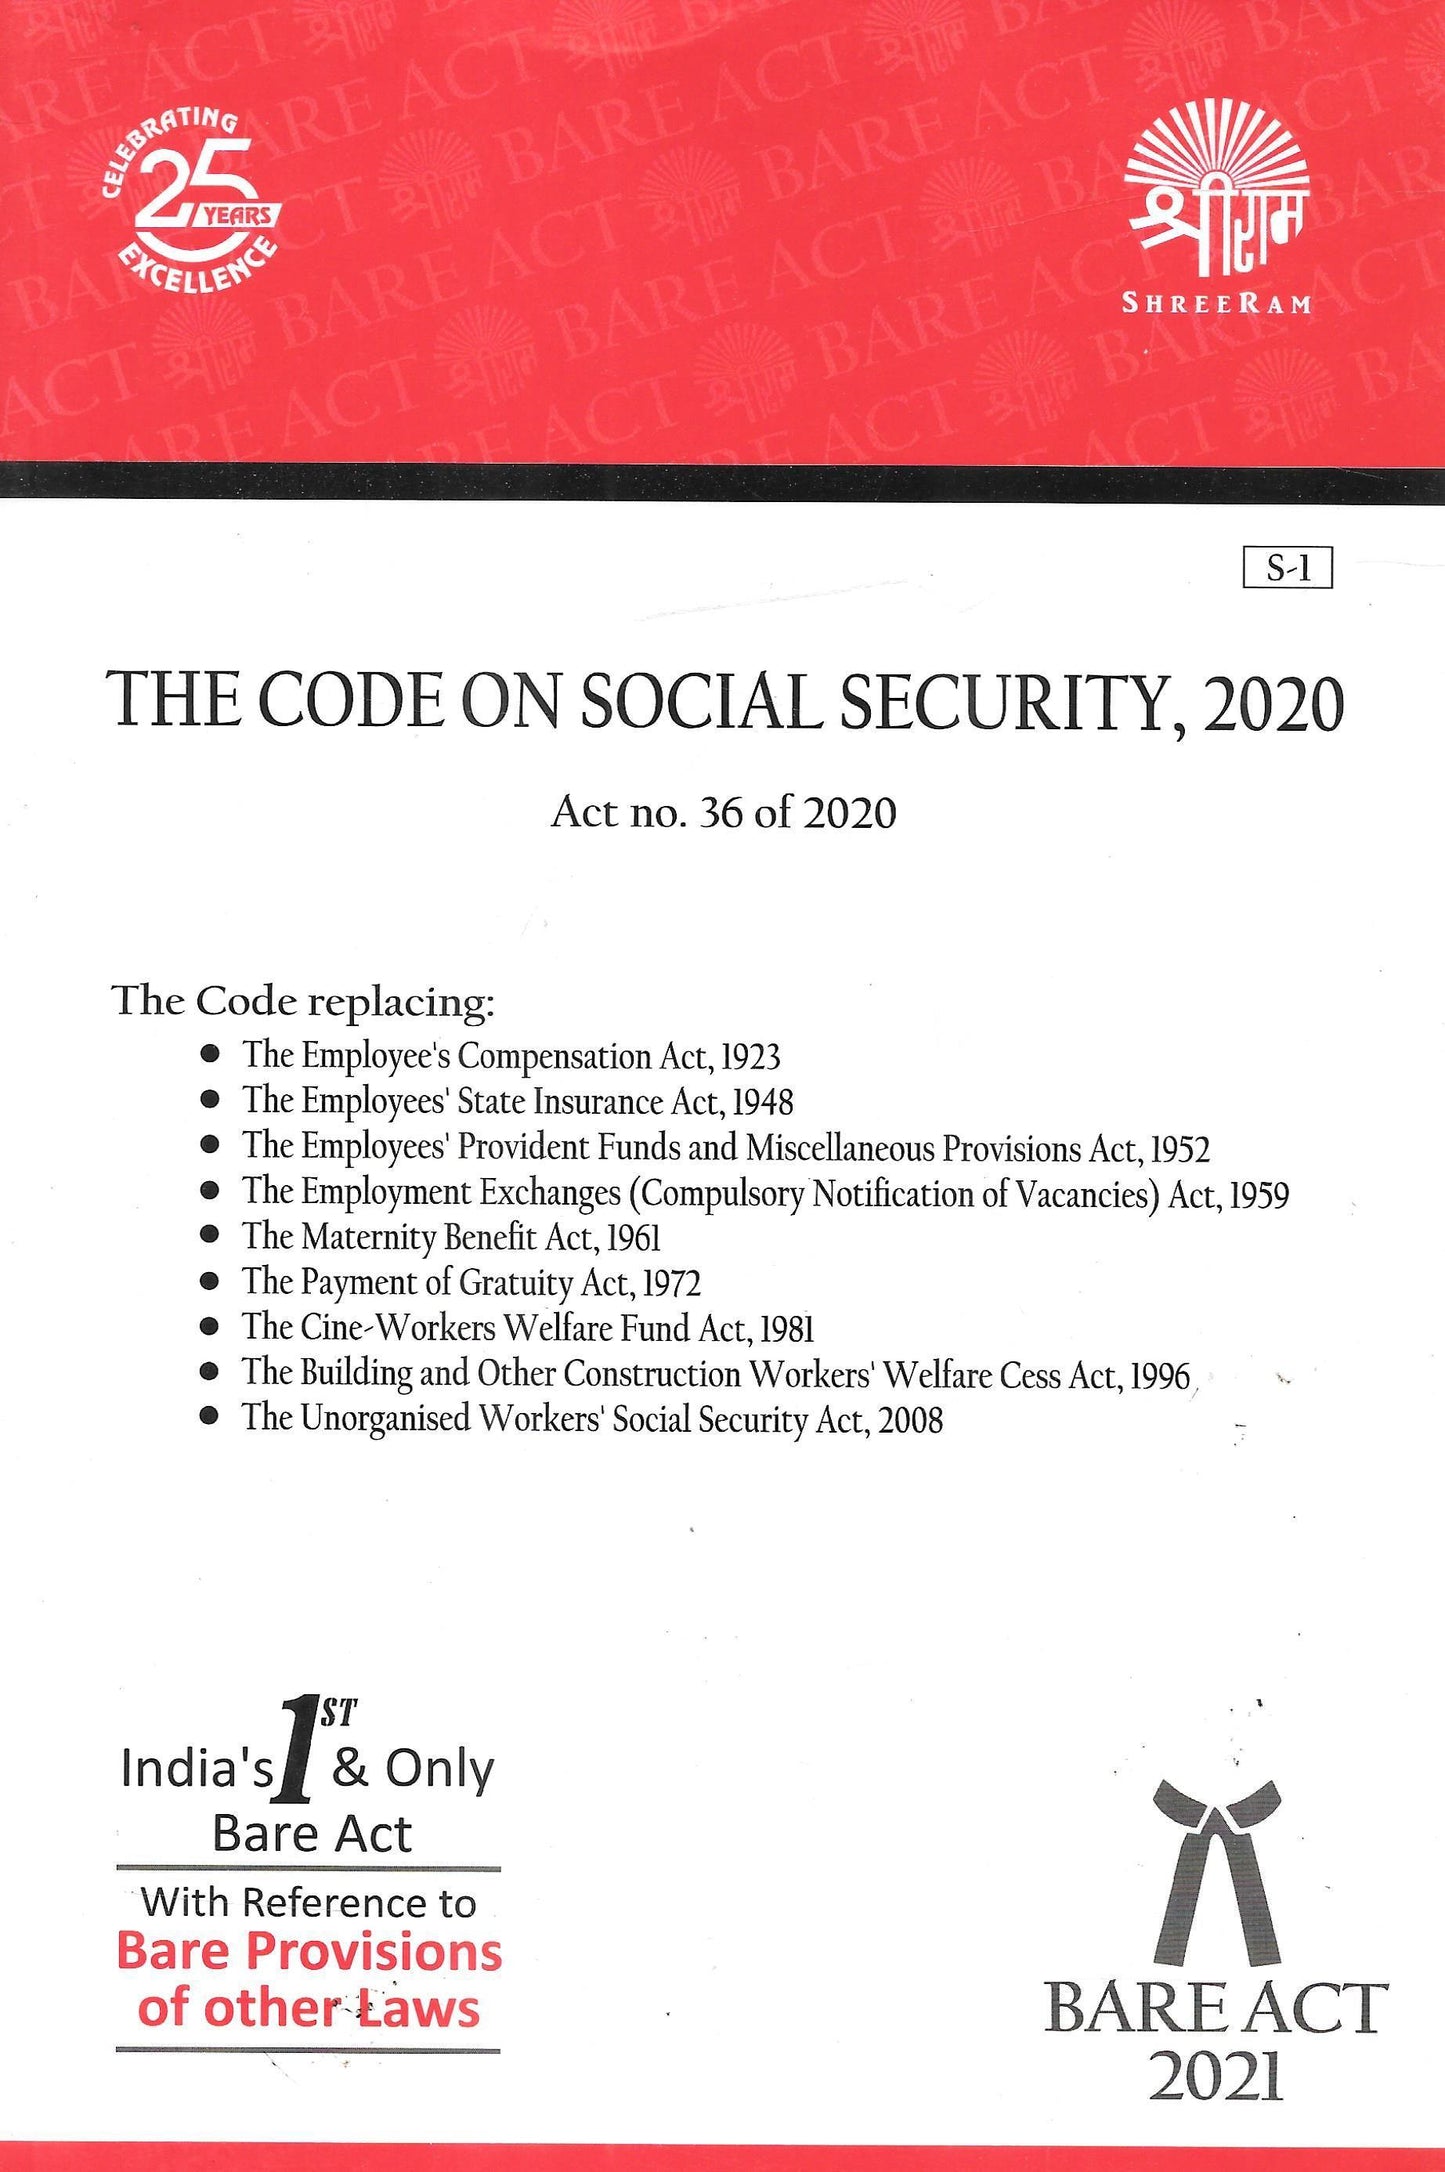 The Code on Social Security, 2020 - M&J Services